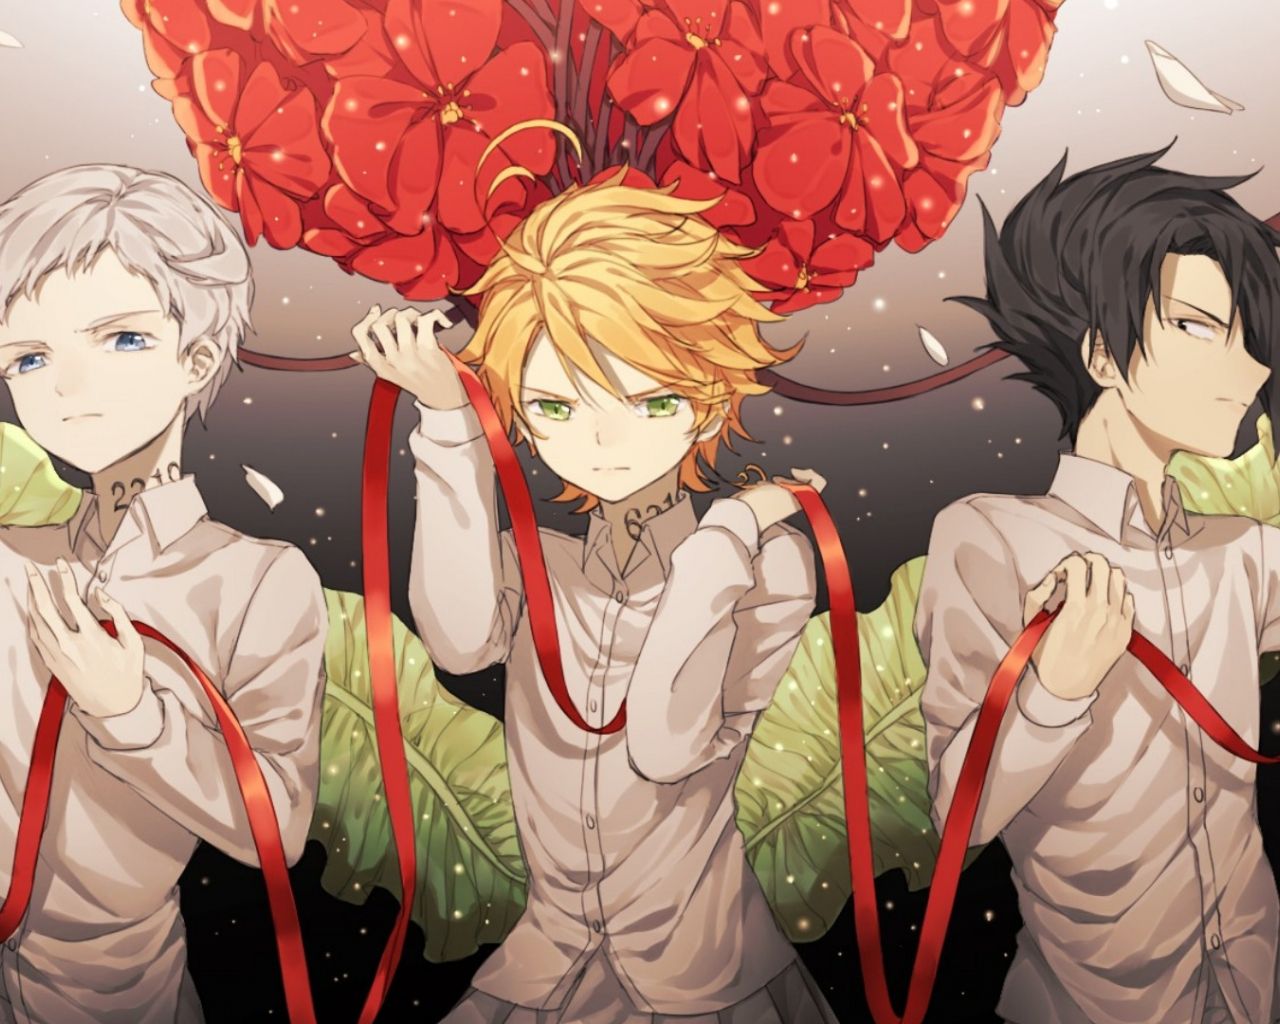 Free download Wallpaper of Anime Emma Norman Ray The Promised Neverland [1920x1080] for your Desktop, Mobile & Tablet. Explore The Promised Neverland Wallpaper. The Promised Neverland Wallpaper, Neverland Wallpaper